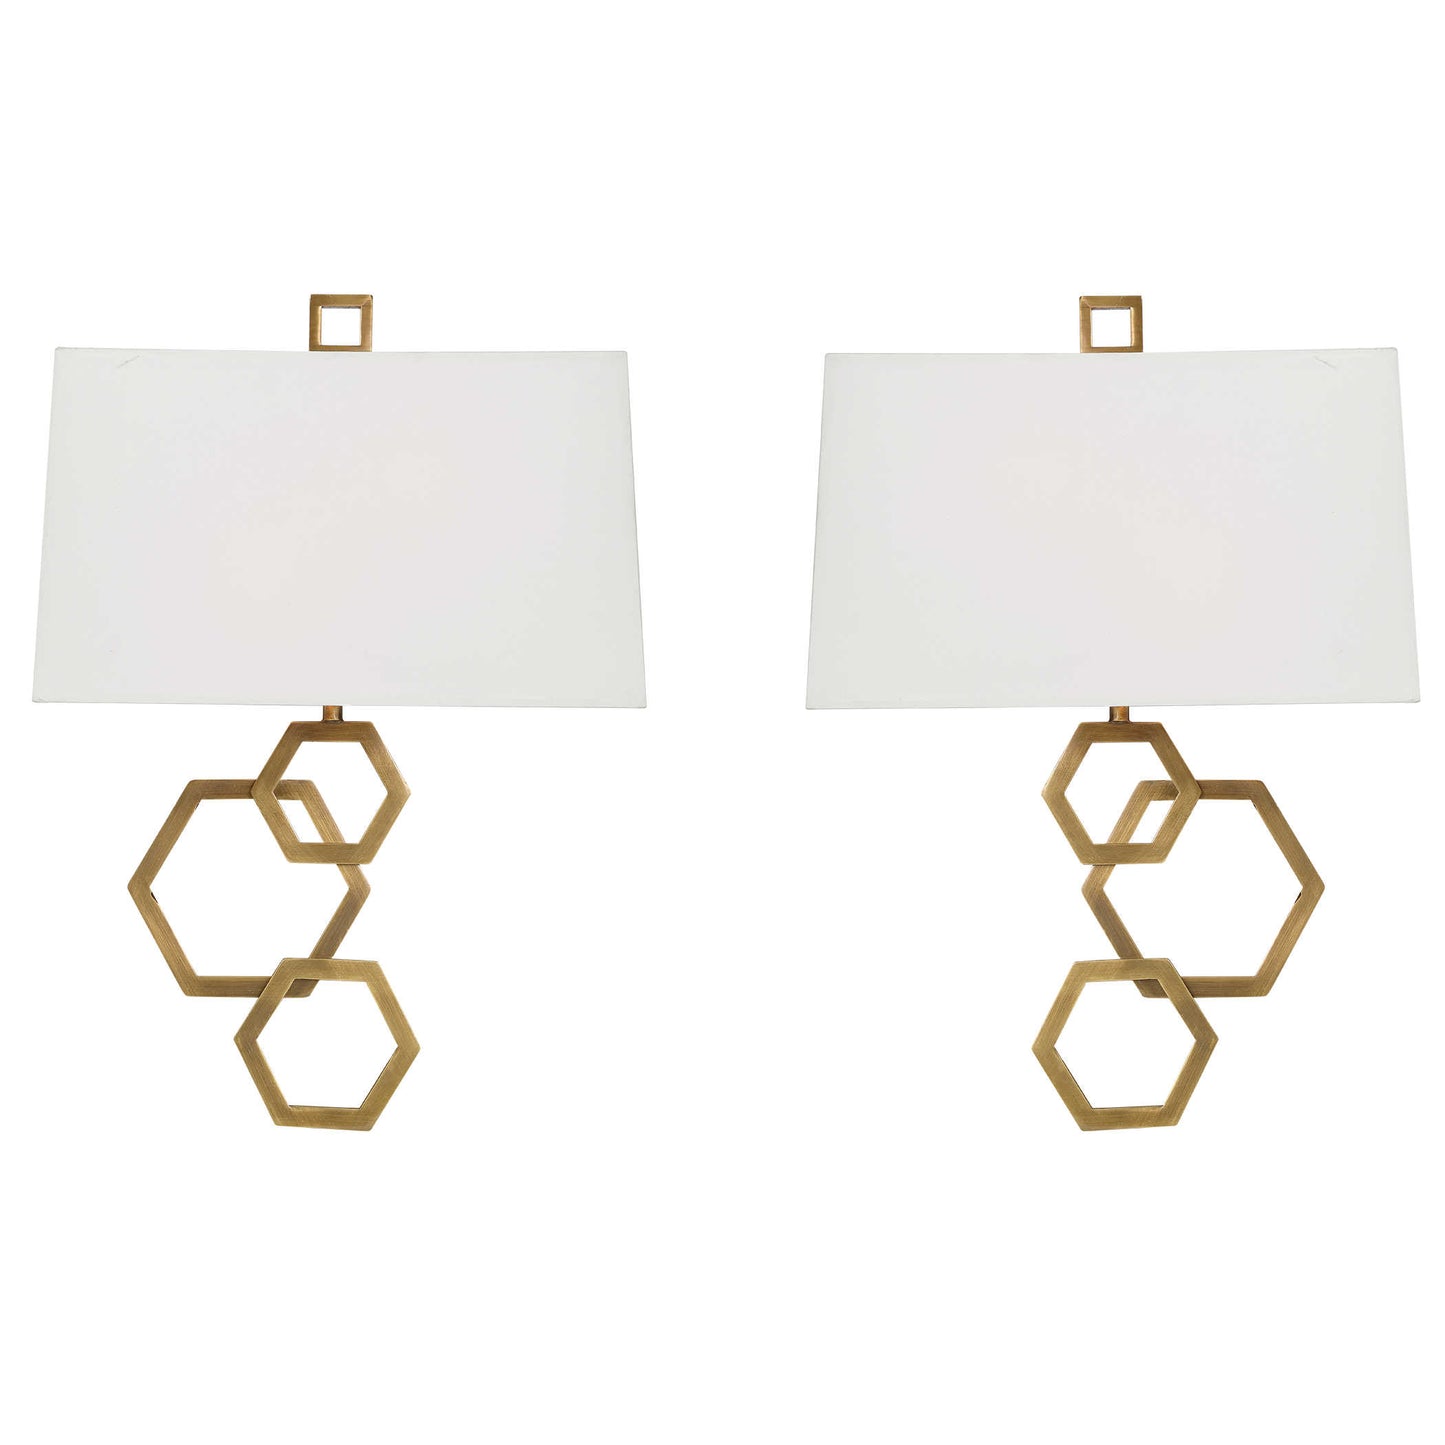 DESERET WALL SCONCE